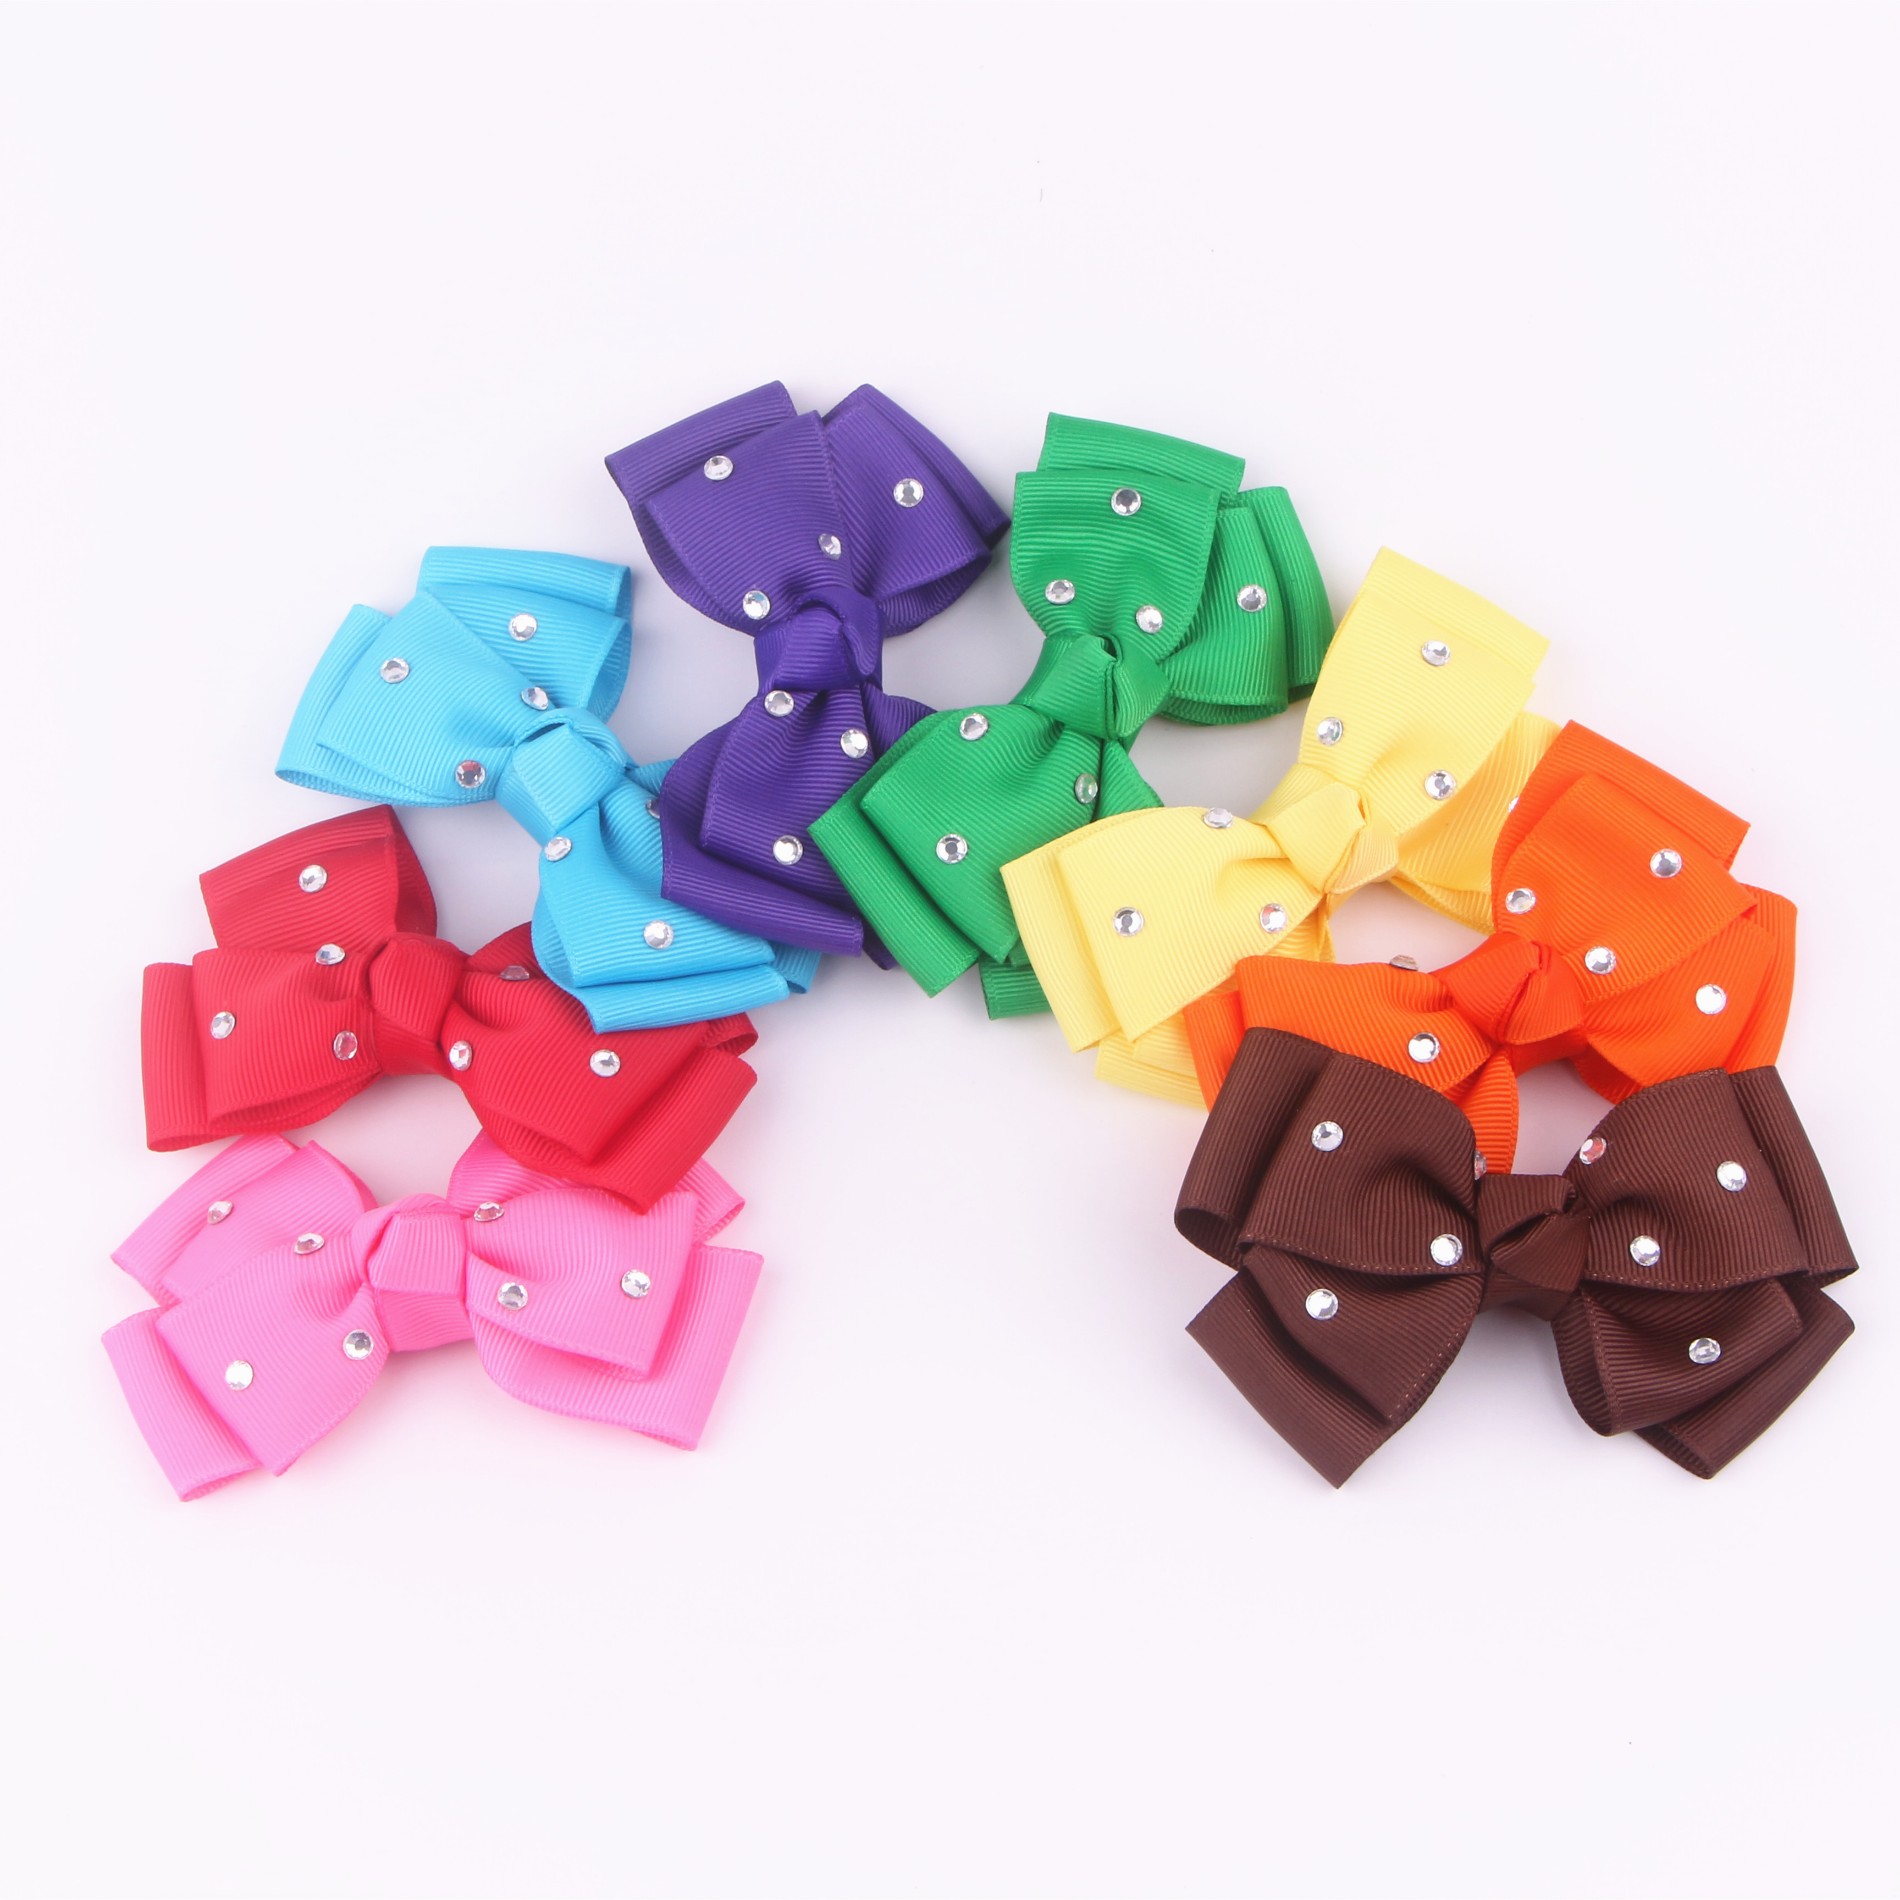 Wholesale Ribbon Bow Boutique Girls Hair Bows With Clips Manufacturers, Wholesale Ribbon Bow Boutique Girls Hair Bows With Clips Factory, Supply Wholesale Ribbon Bow Boutique Girls Hair Bows With Clips